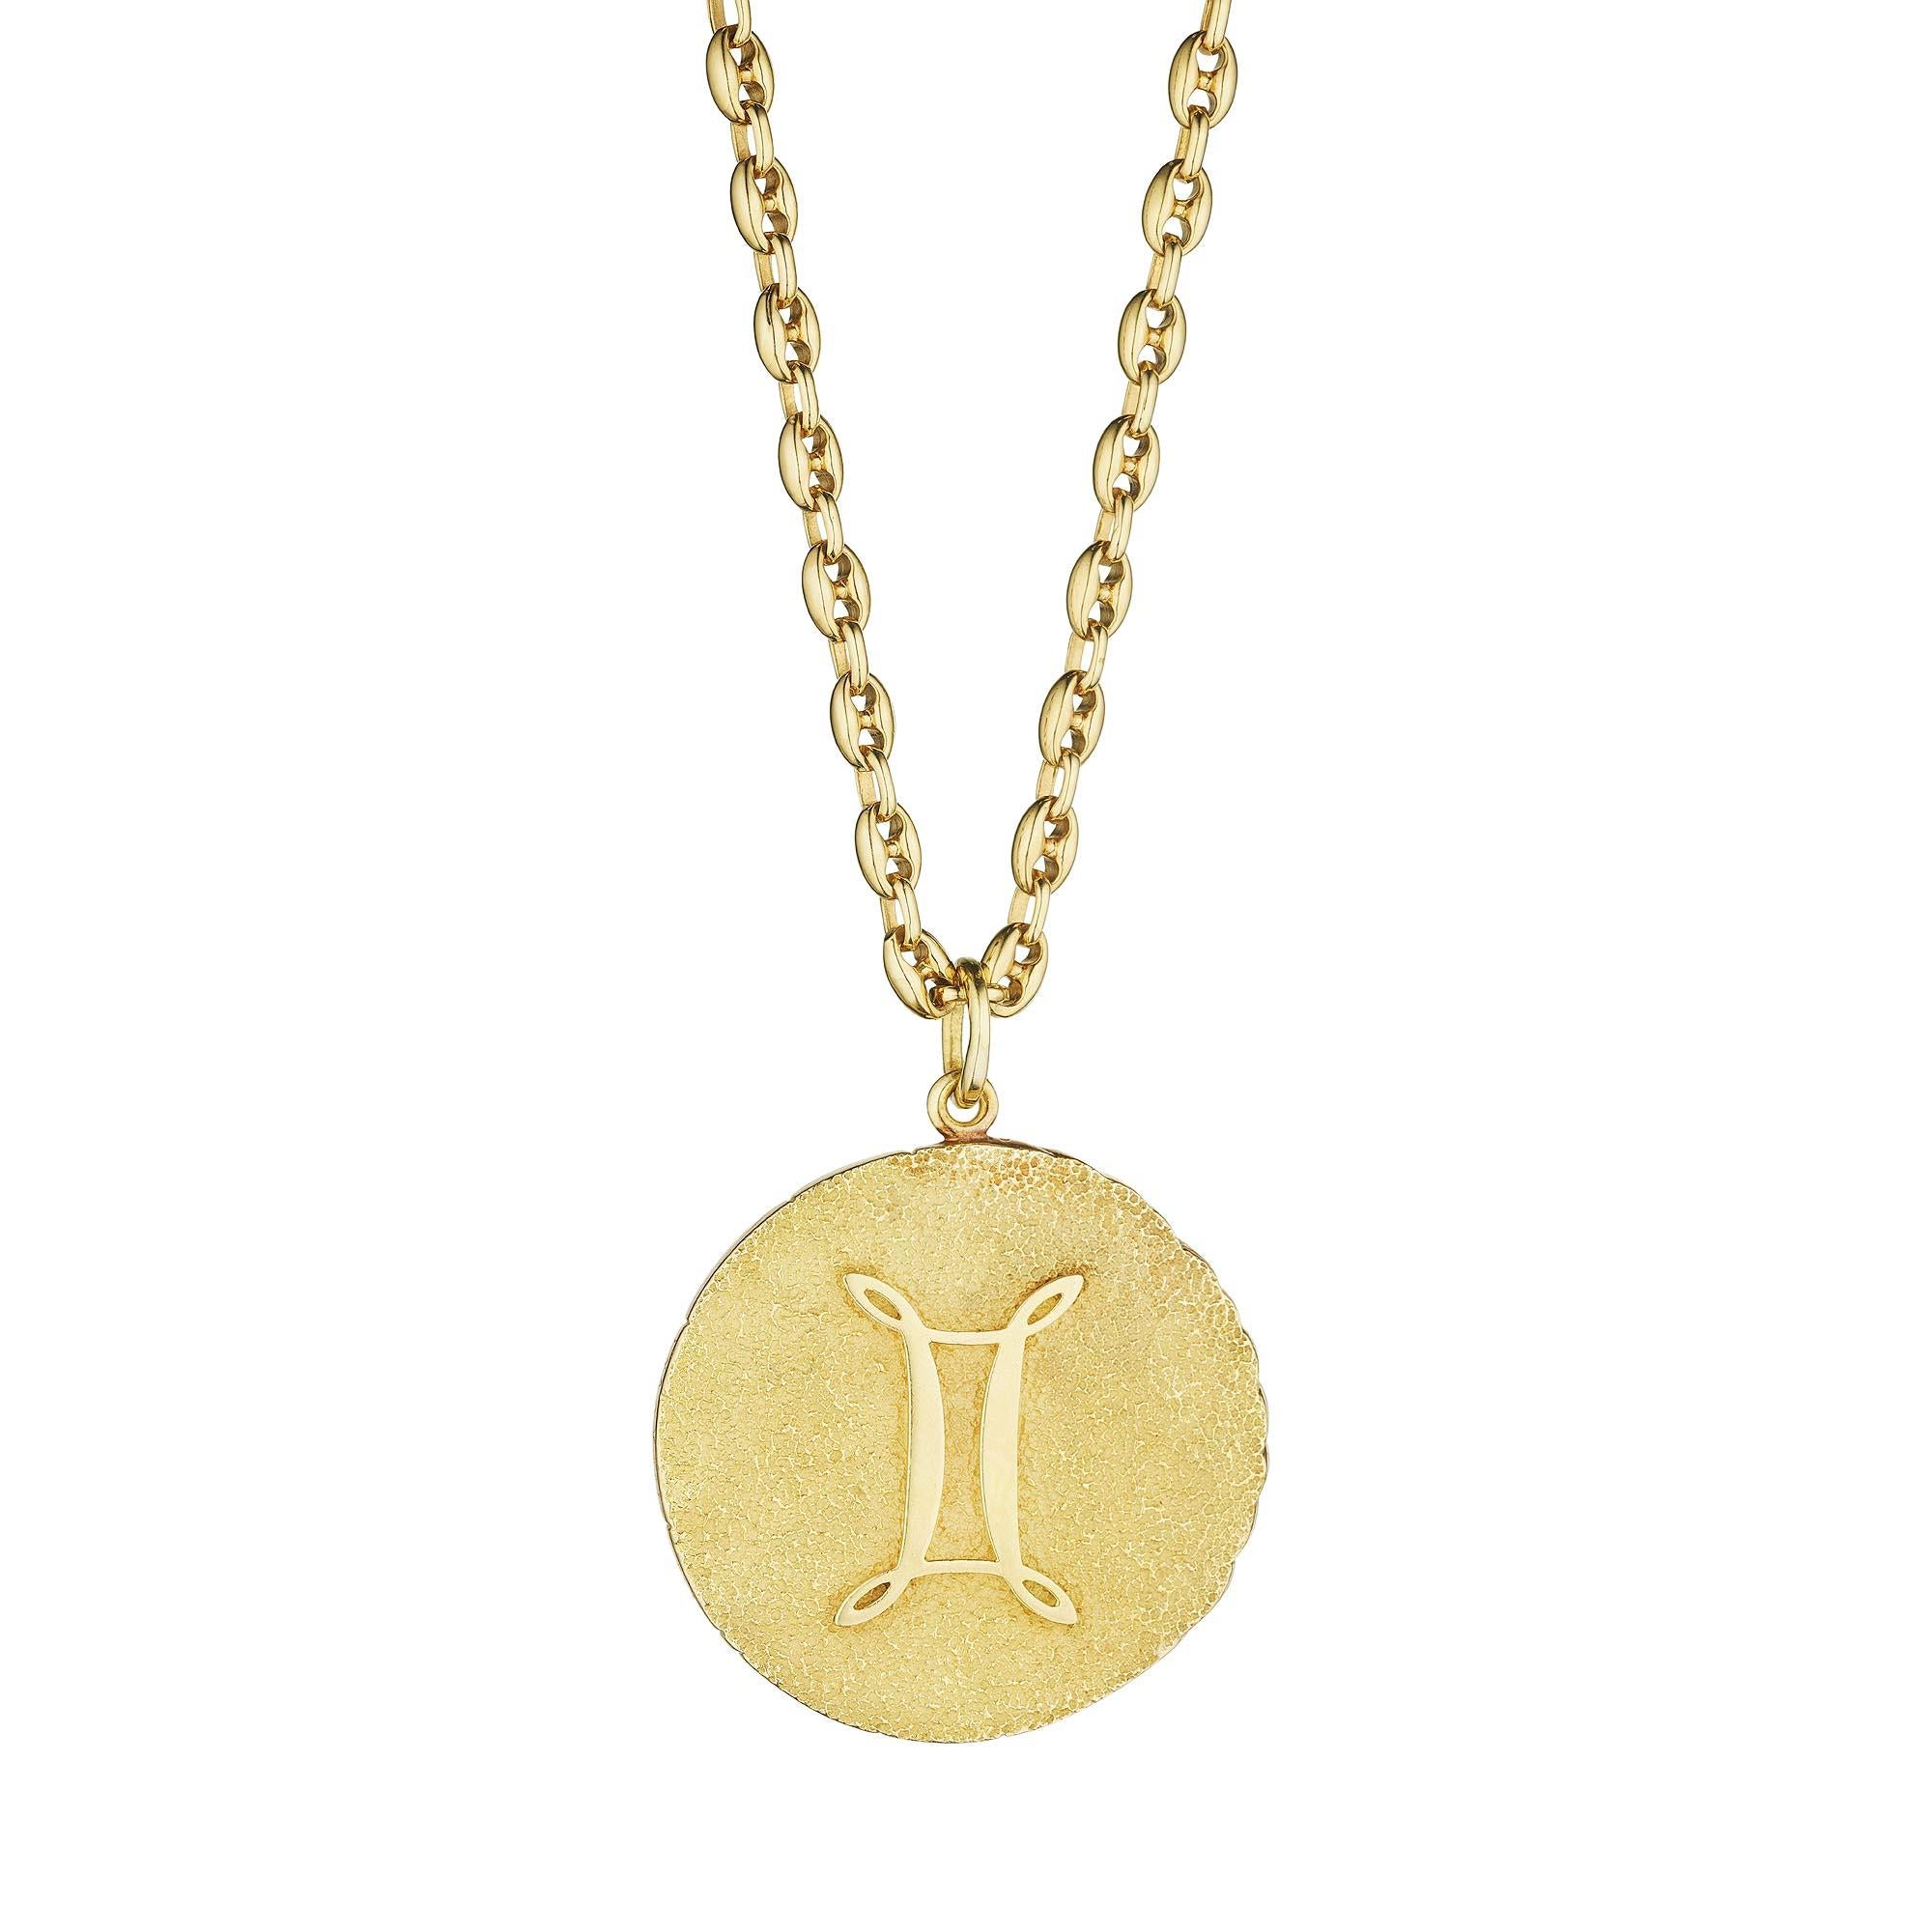 The zodiac symbol for Gemini is twins, and this modernist Tiffany & Co. pendant will keep you seeing double.  With a doubled faced front and the Gemini symbol on the back, this hefty 18 karat yellow gold circular pedant necklace proves that two is